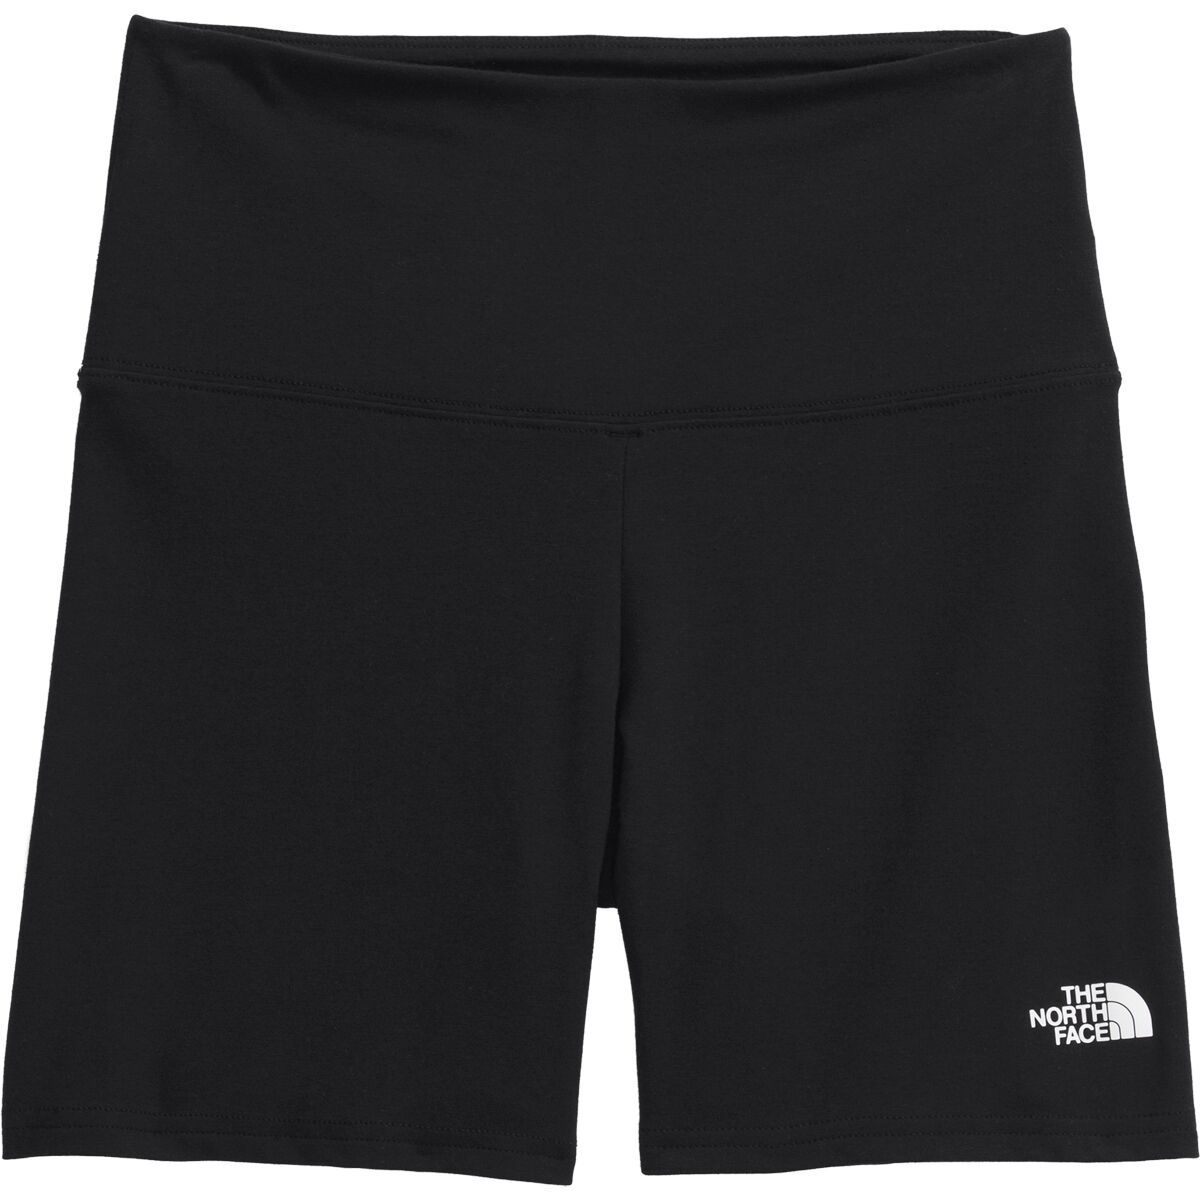 The North Face Women’s bike shorts size M